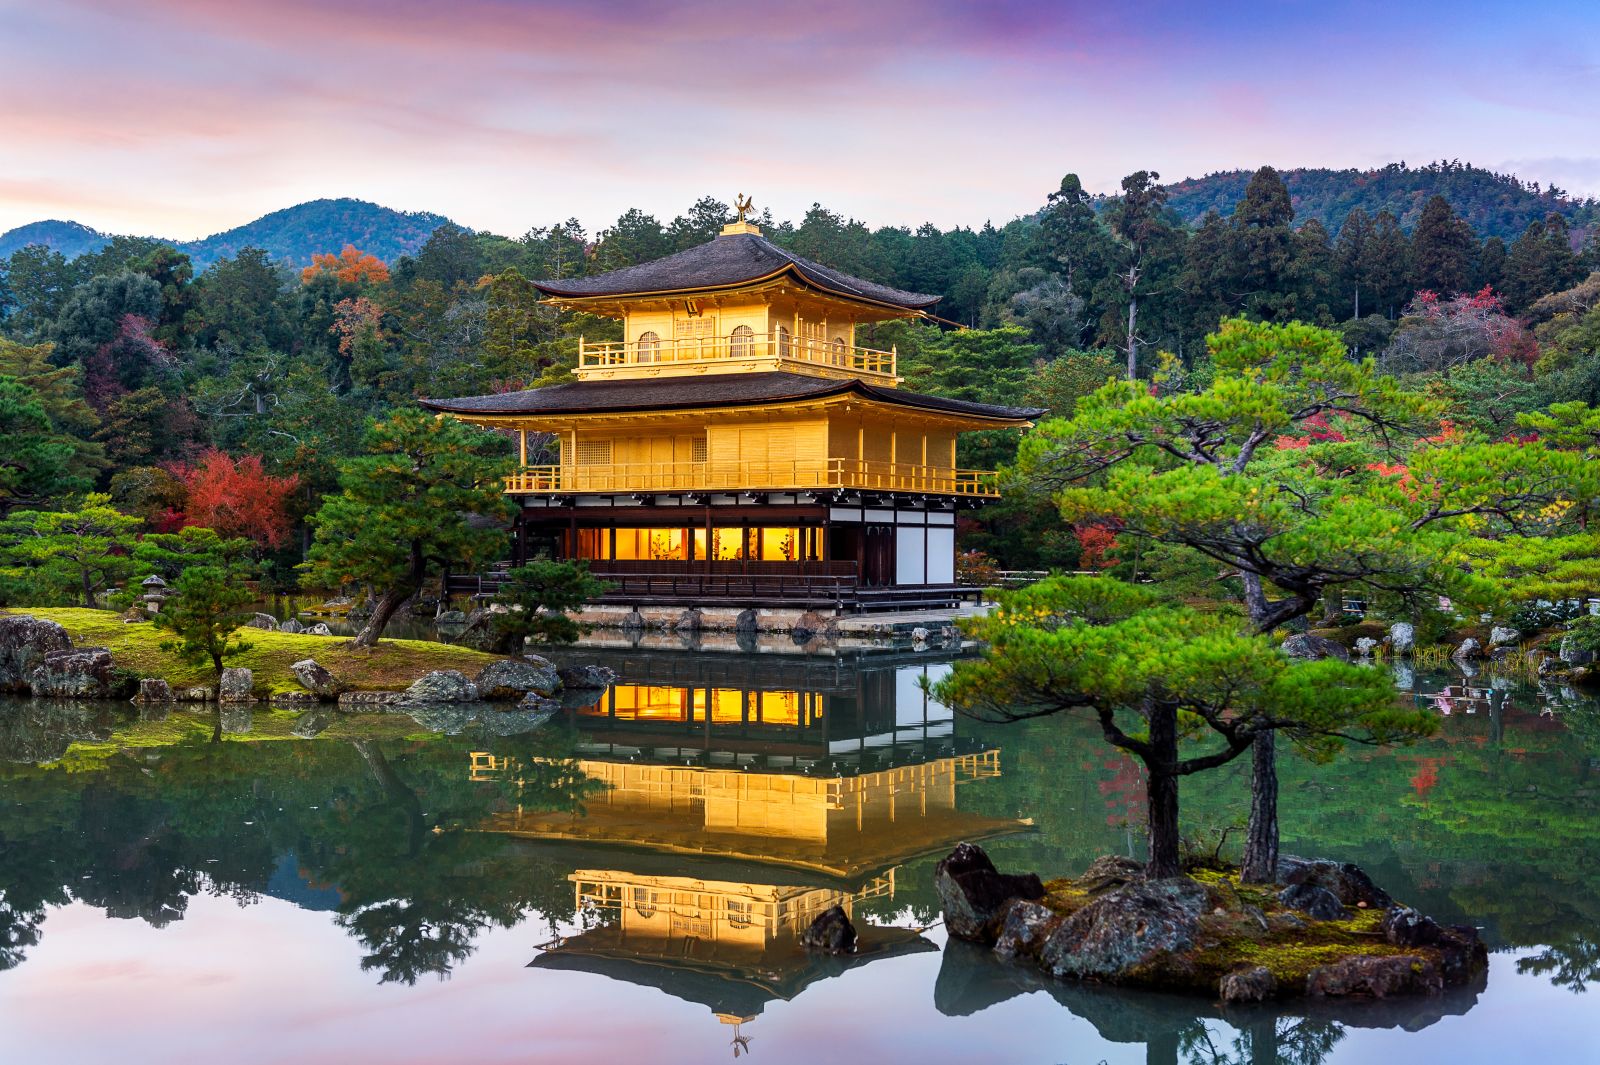 The golden pavilion in Kyoto reflected on the lake